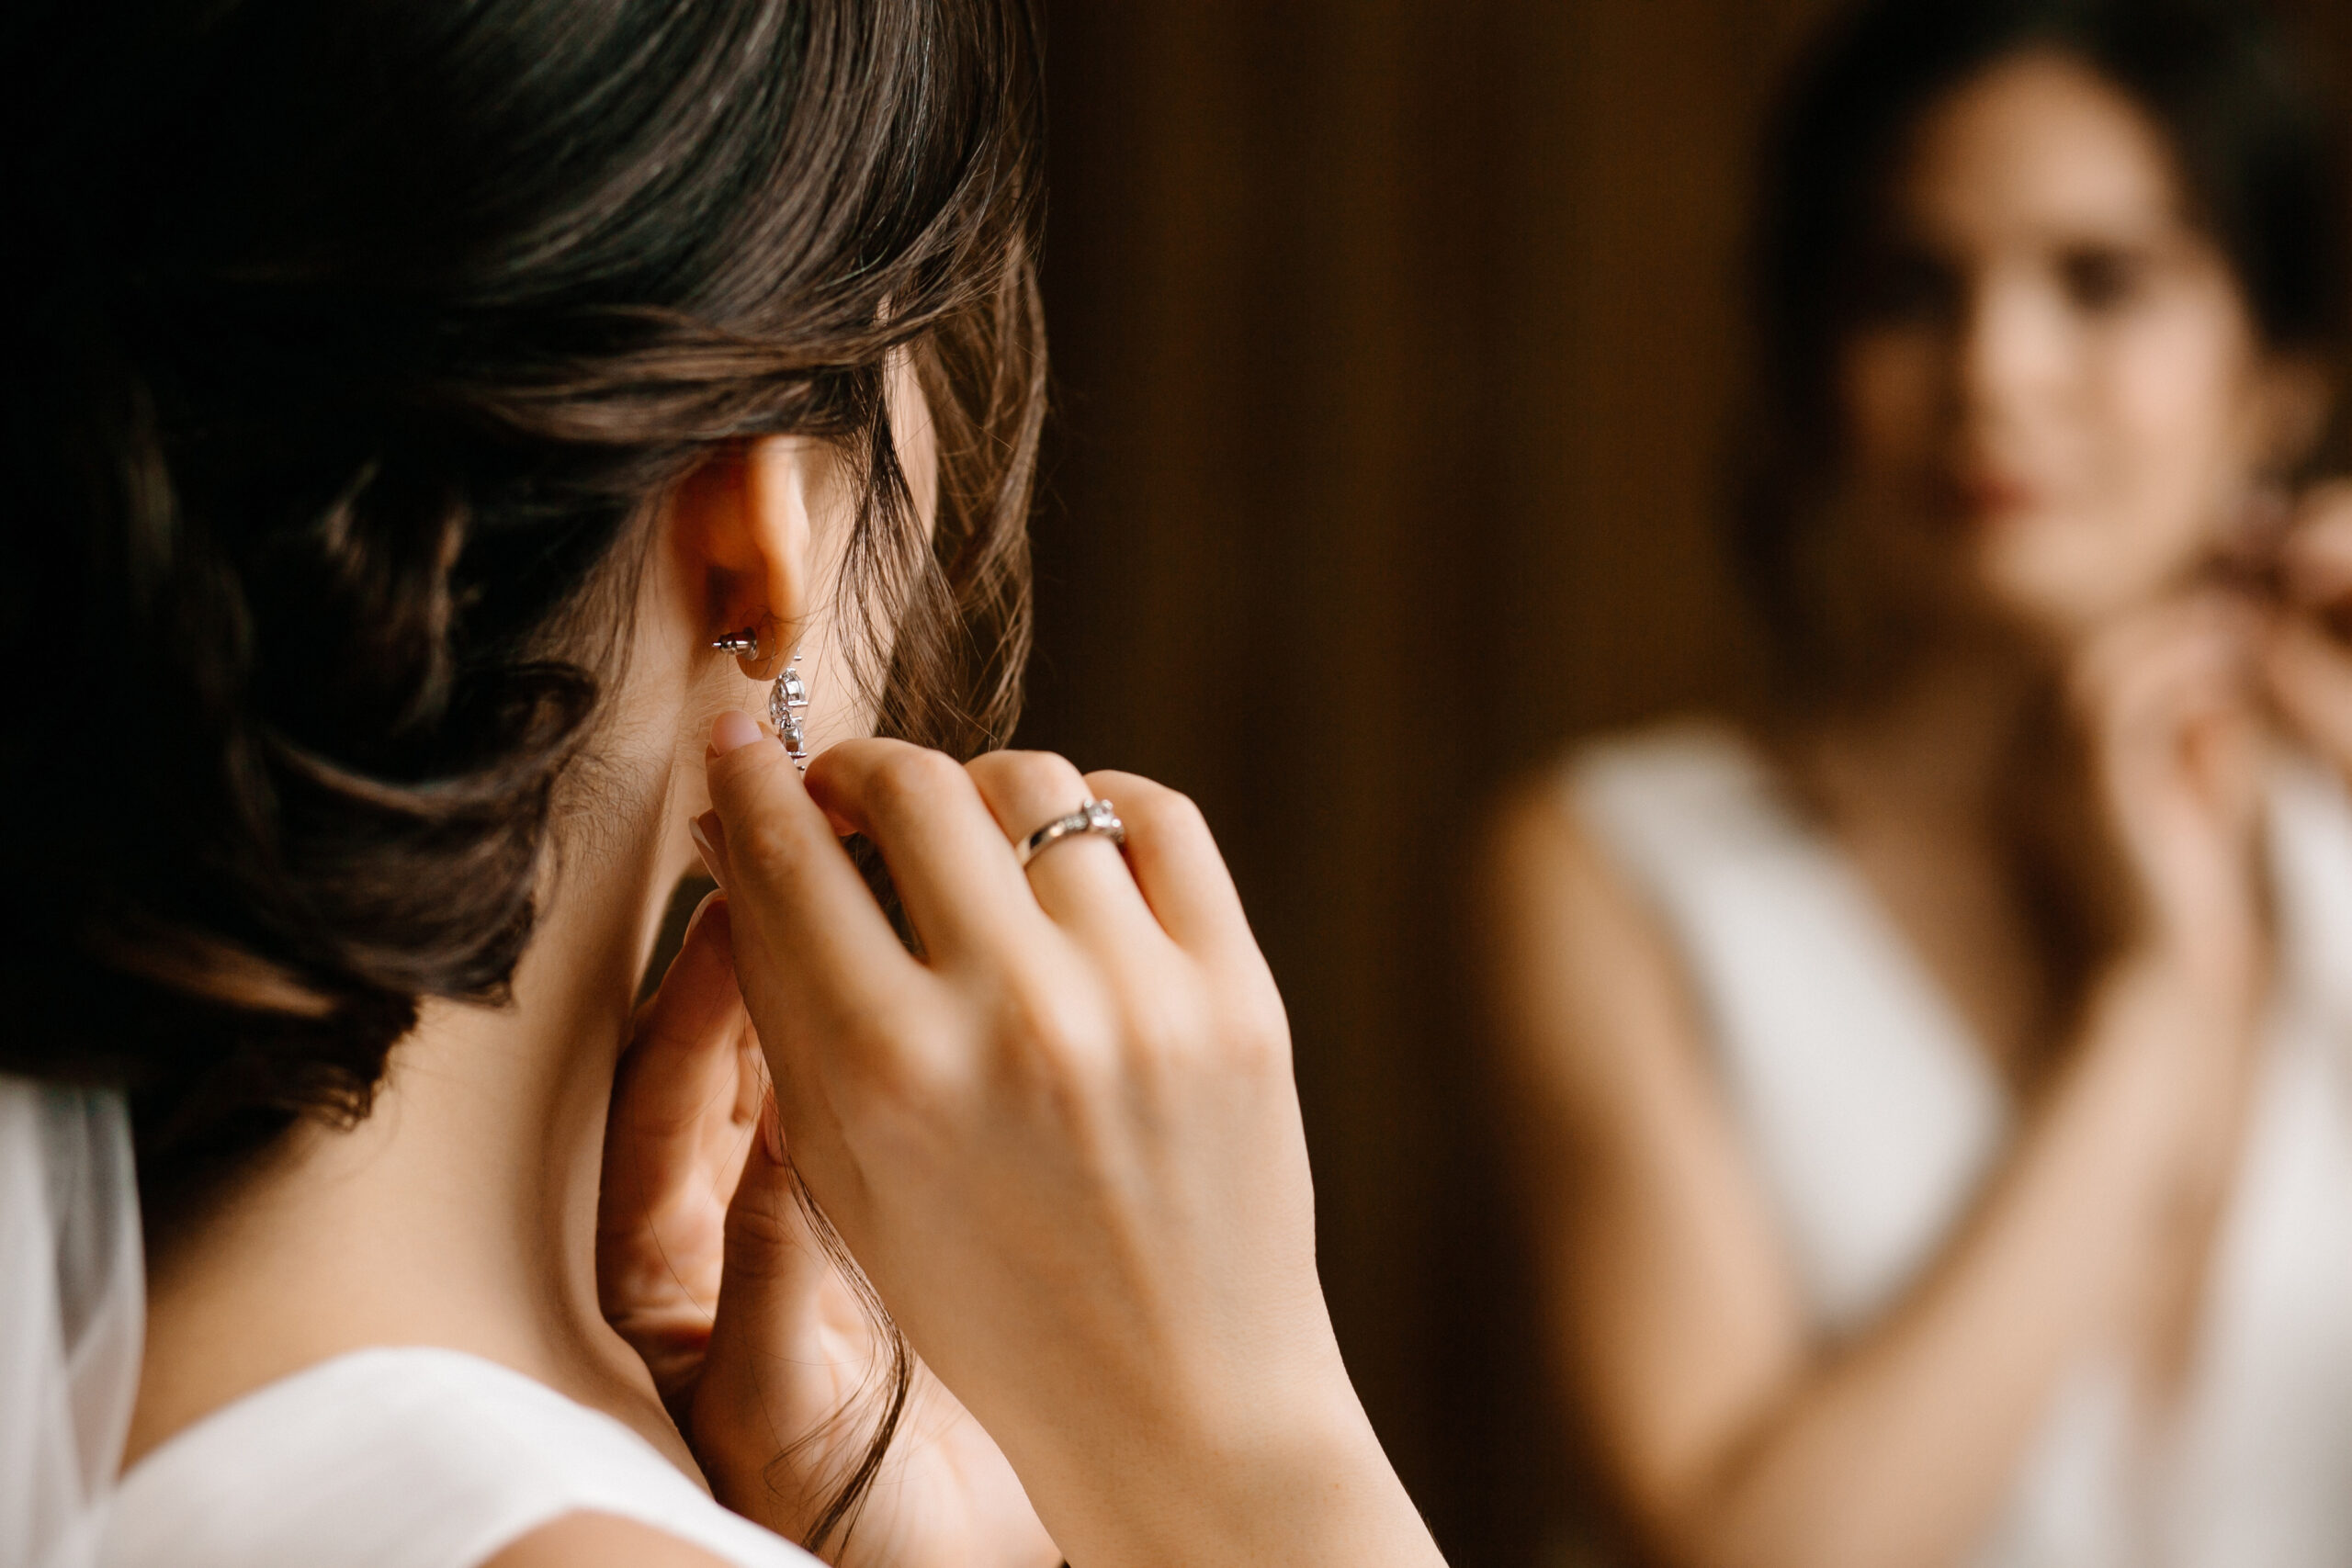 Stunning woman adjusting earrings in front of a mirror.